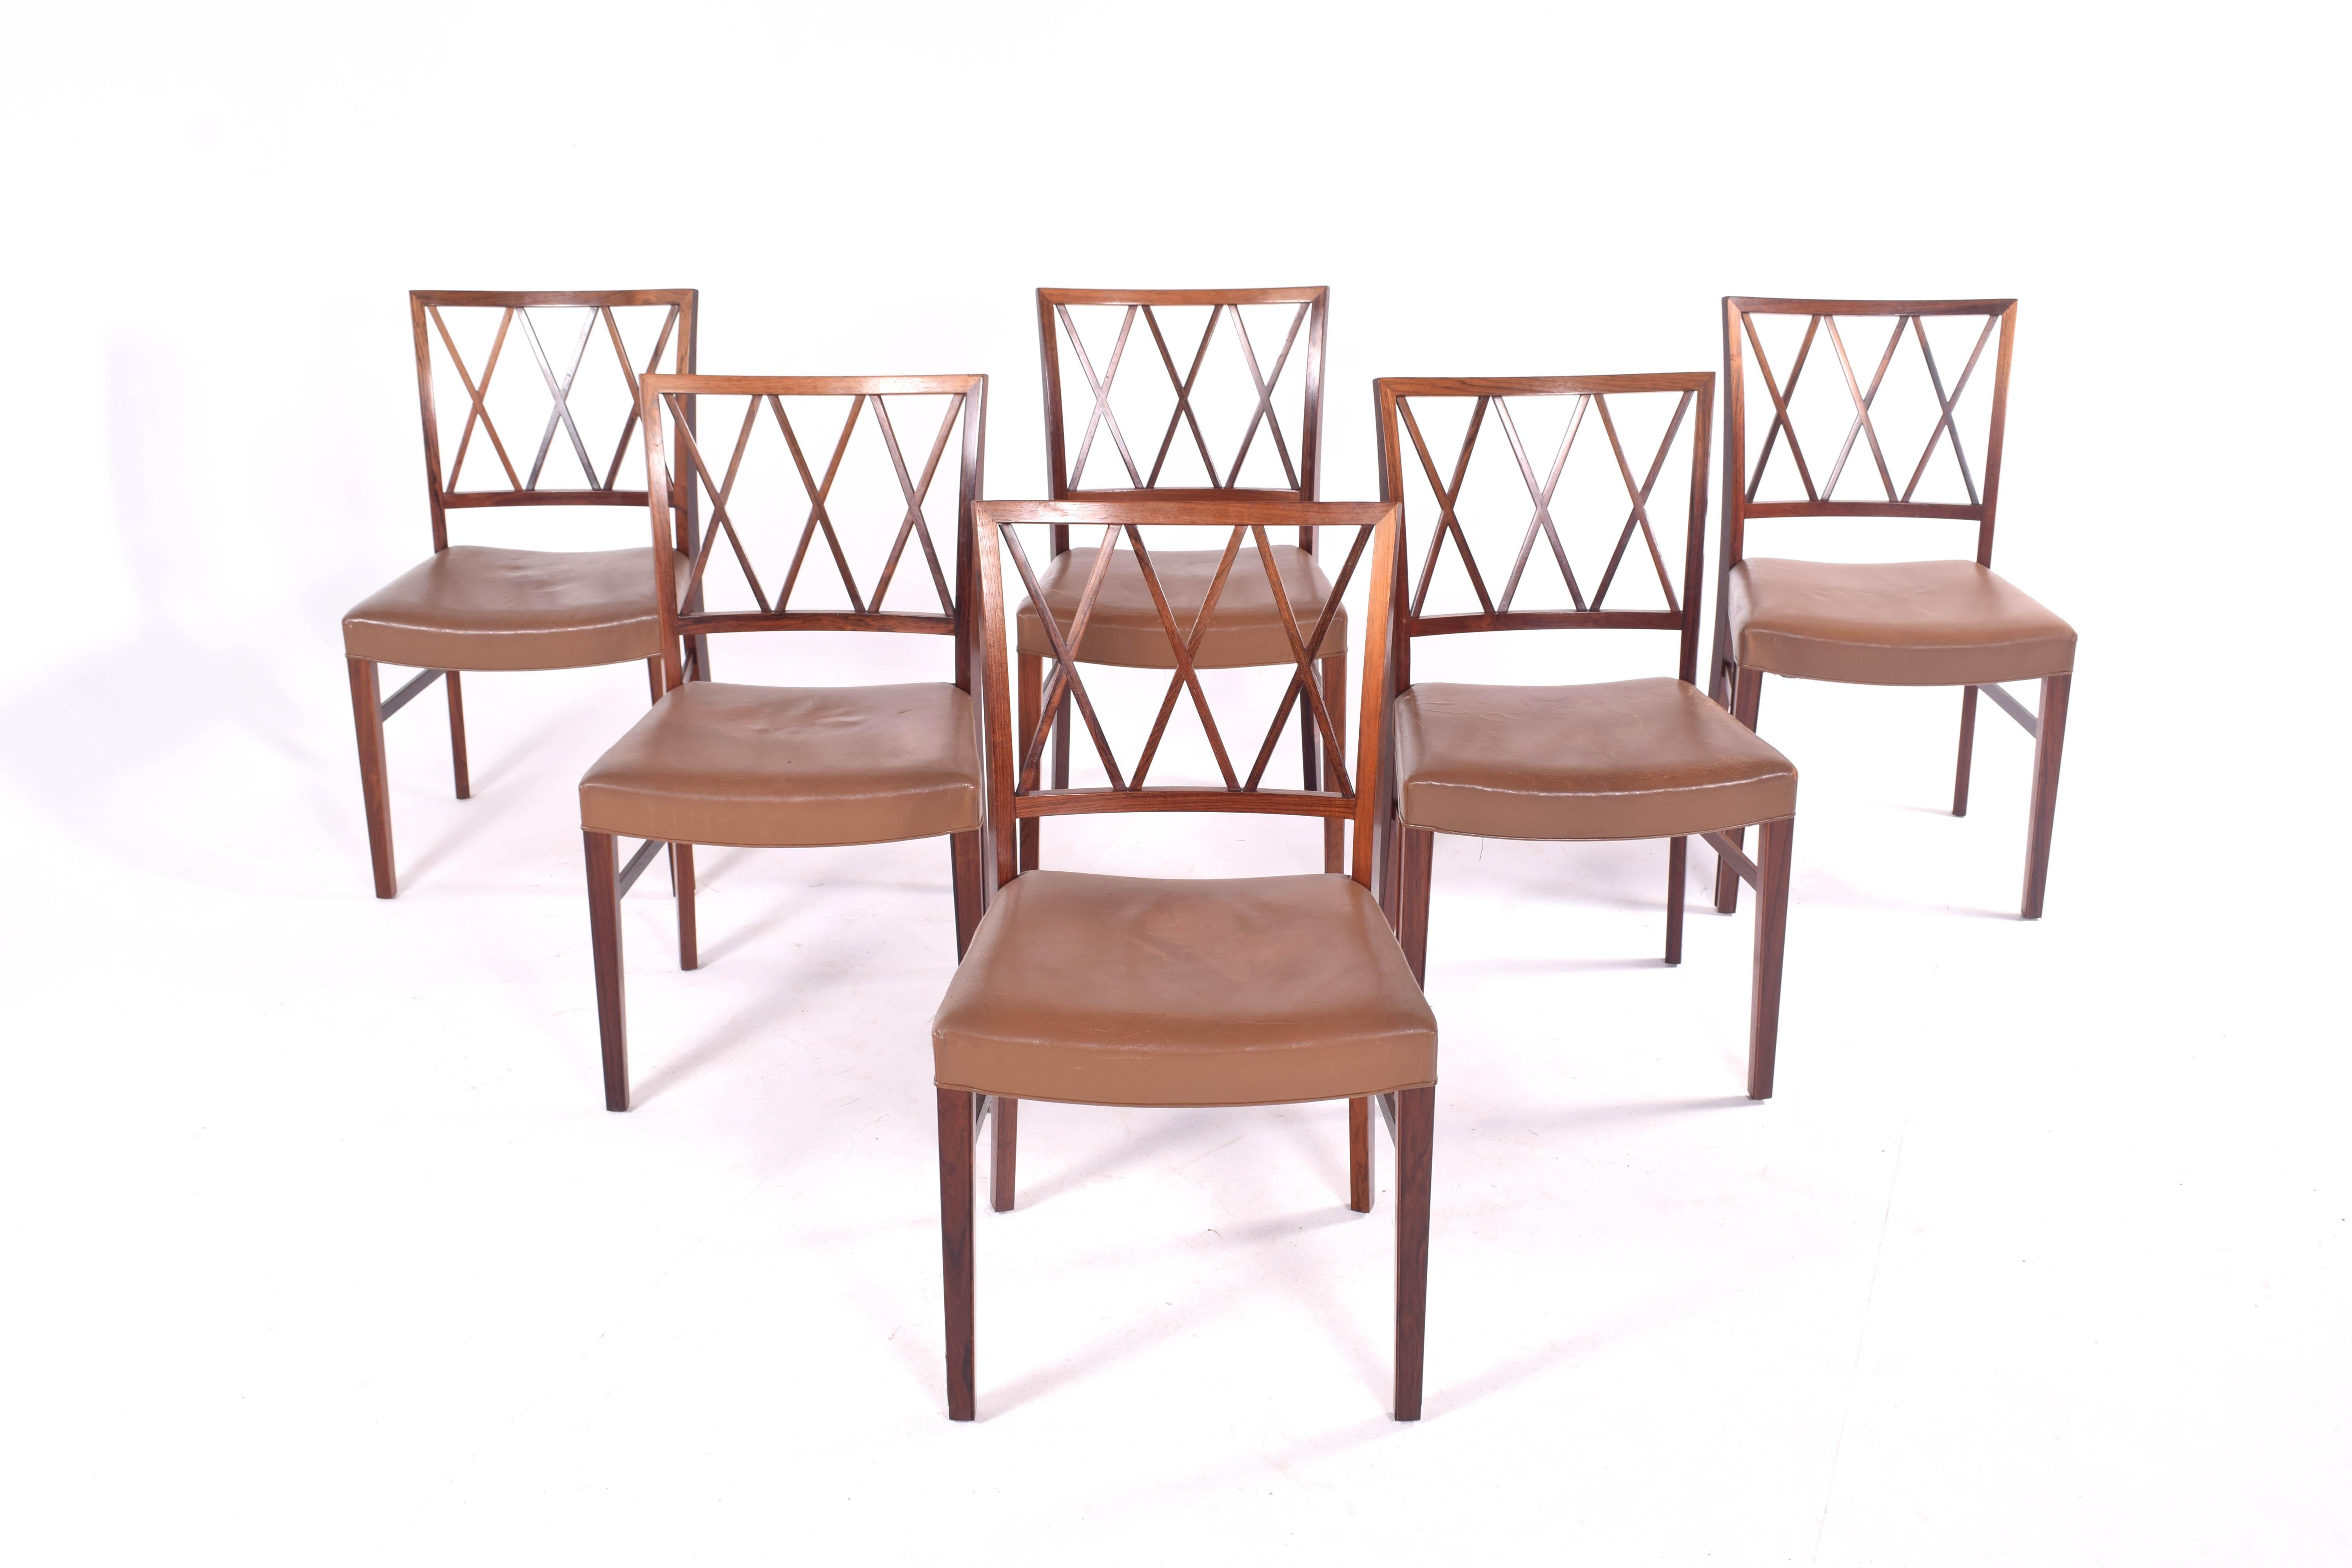 A set of 6 rosewood dining chairs by Ole Wanscher for Slagelse. This is one of Wanscher's classic designs. The frames are constructed of rosewood.